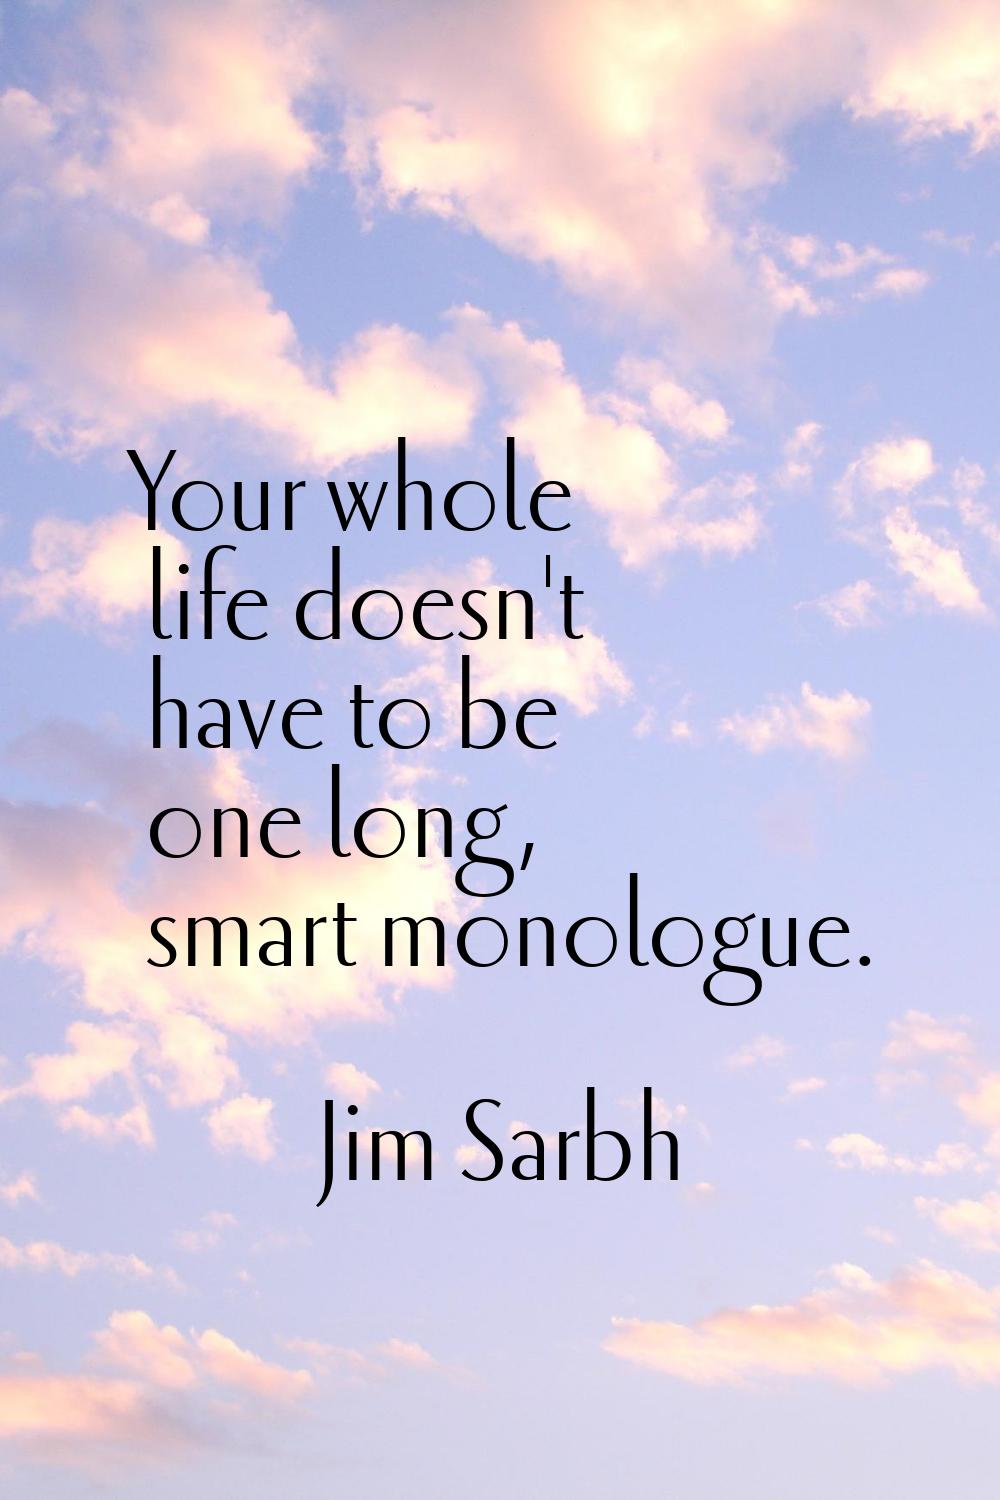 Your whole life doesn't have to be one long, smart monologue.